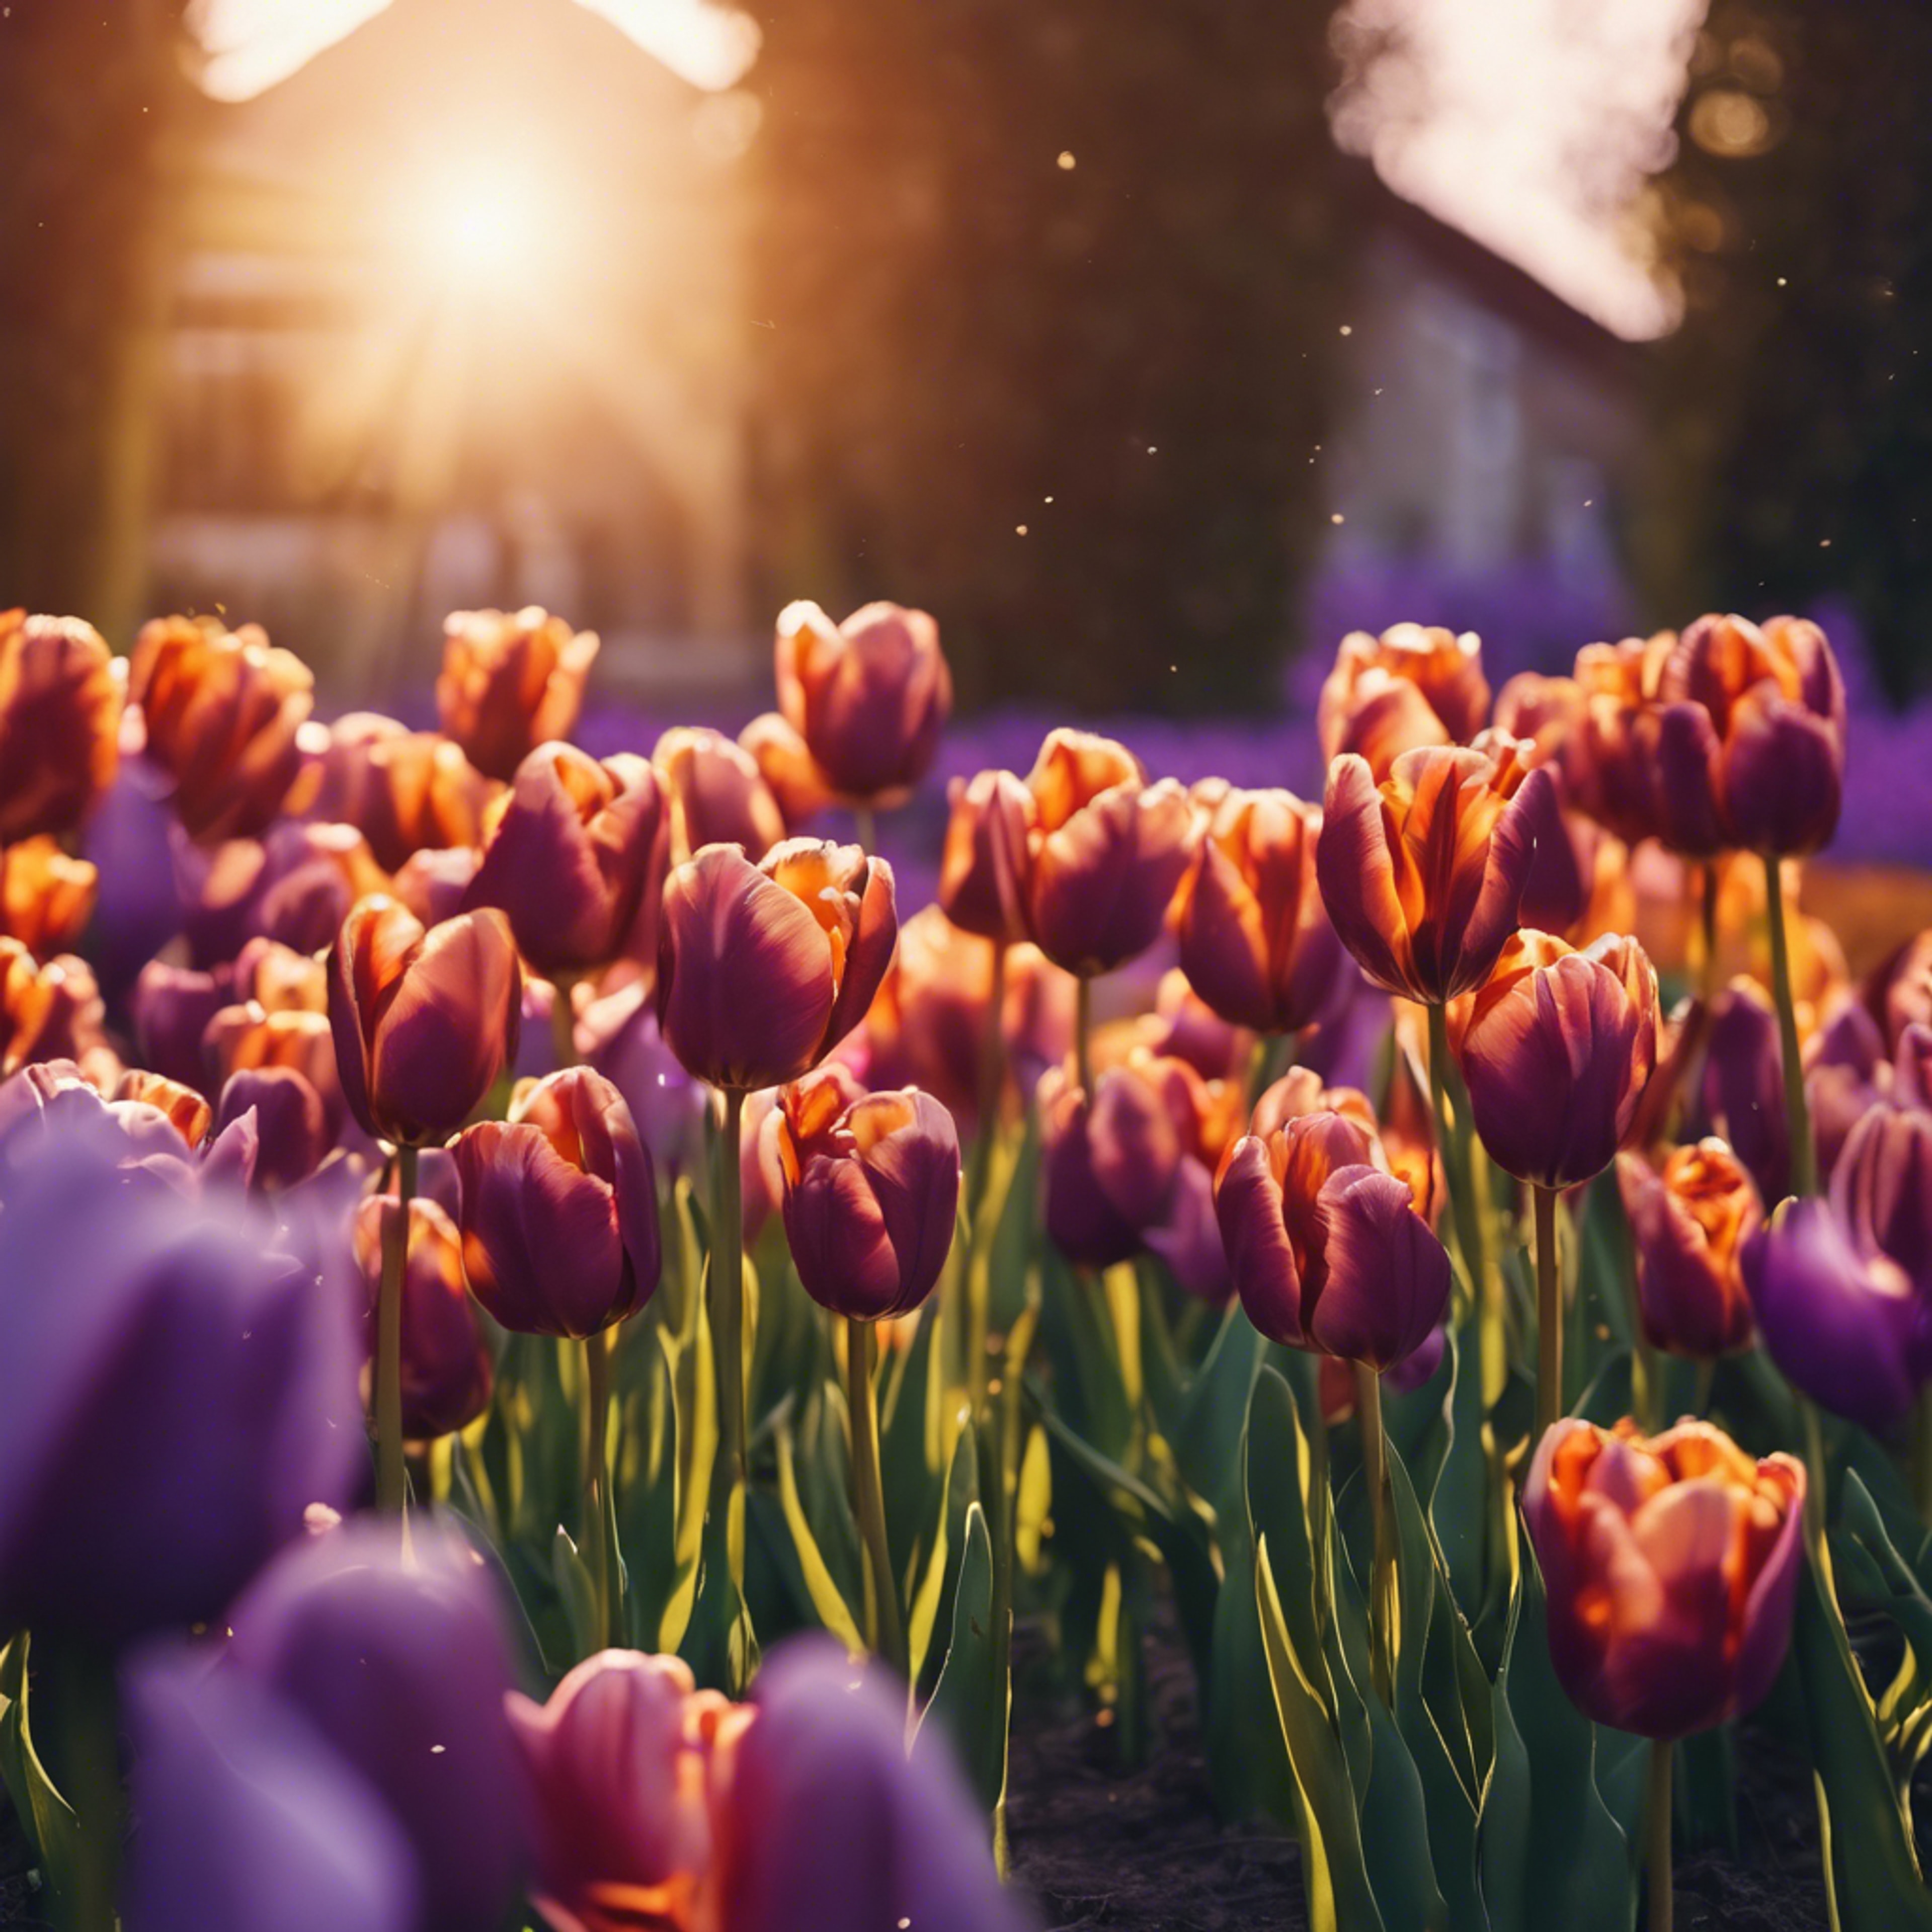 Tulips in a garden, bathed in the purple and orange rays of the setting sun. ផ្ទាំង​រូបភាព[929499f715404d6e96f8]